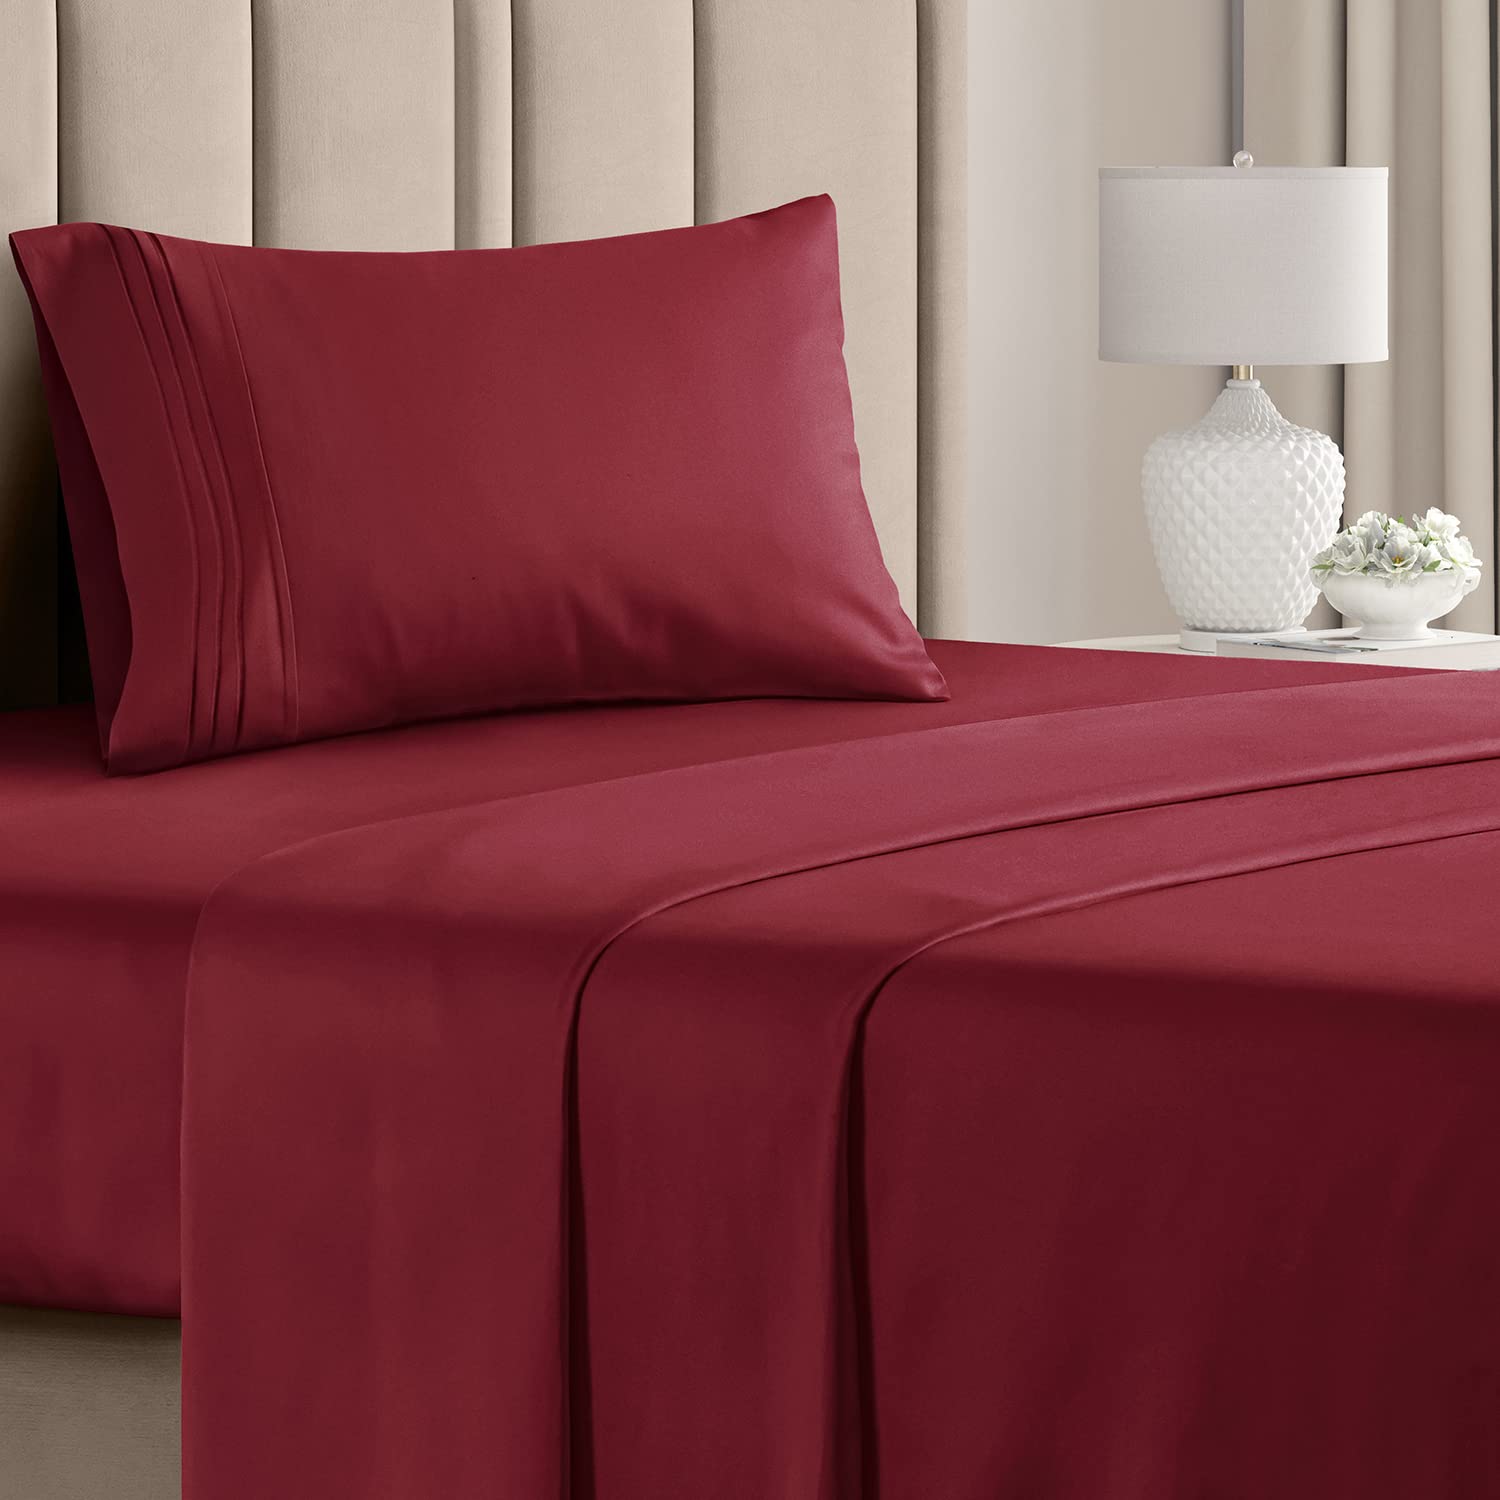 Book Cover Twin XL Sheet Set - Breathable & Cooling - College Dorm Room Bed Sheets - Hotel Luxury Bed Sheets - Extra Soft Sheets - Deep Pockets - Easy Fit - 3 Piece Set - Bed Sheets - Twin - Twin XL Bed Sheet 26 - Burgundy Twin XL